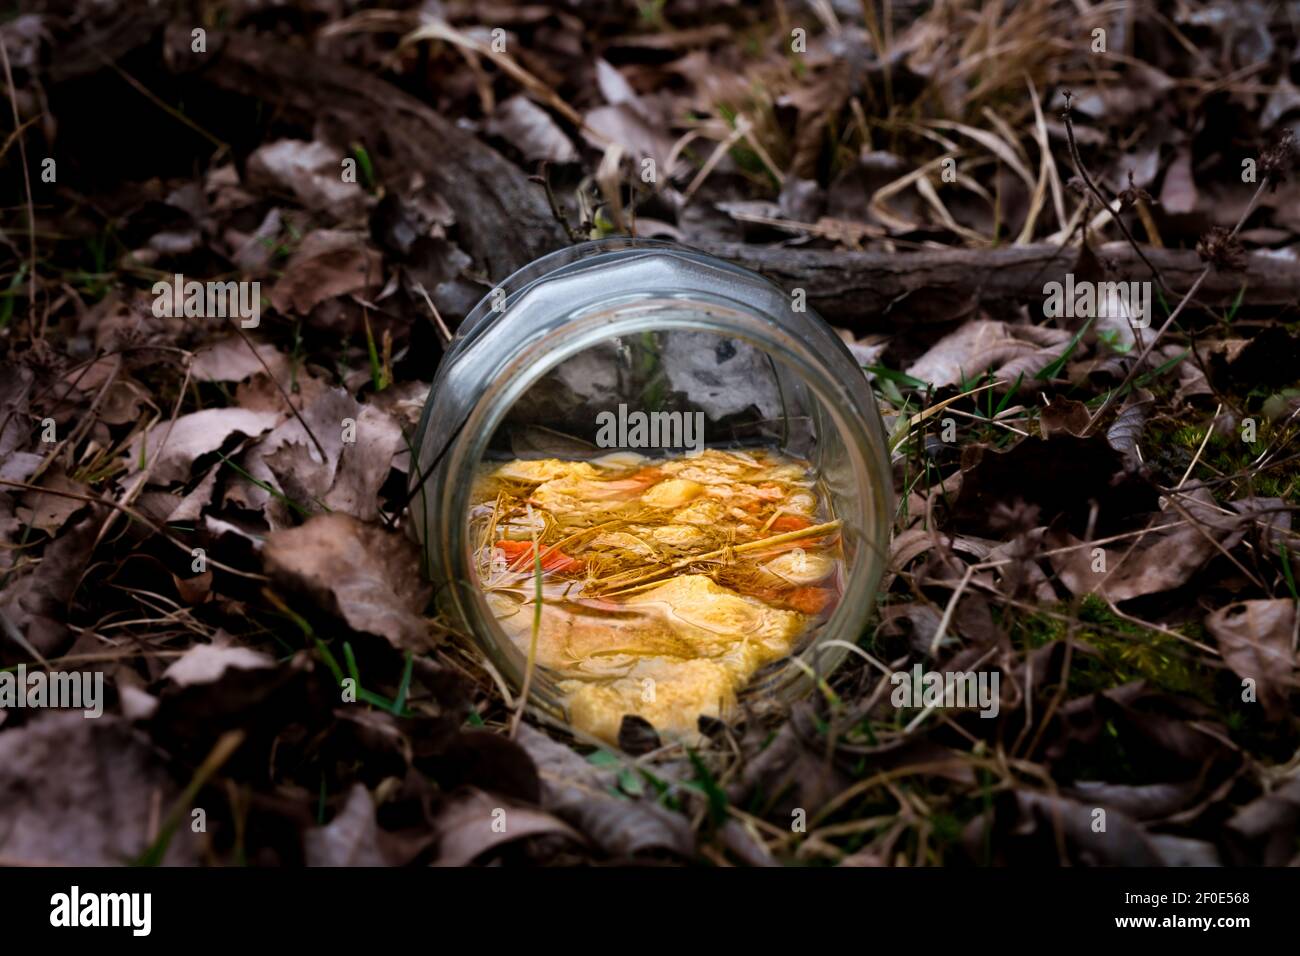 jar of rotten food thrown in the woods Stock Photo